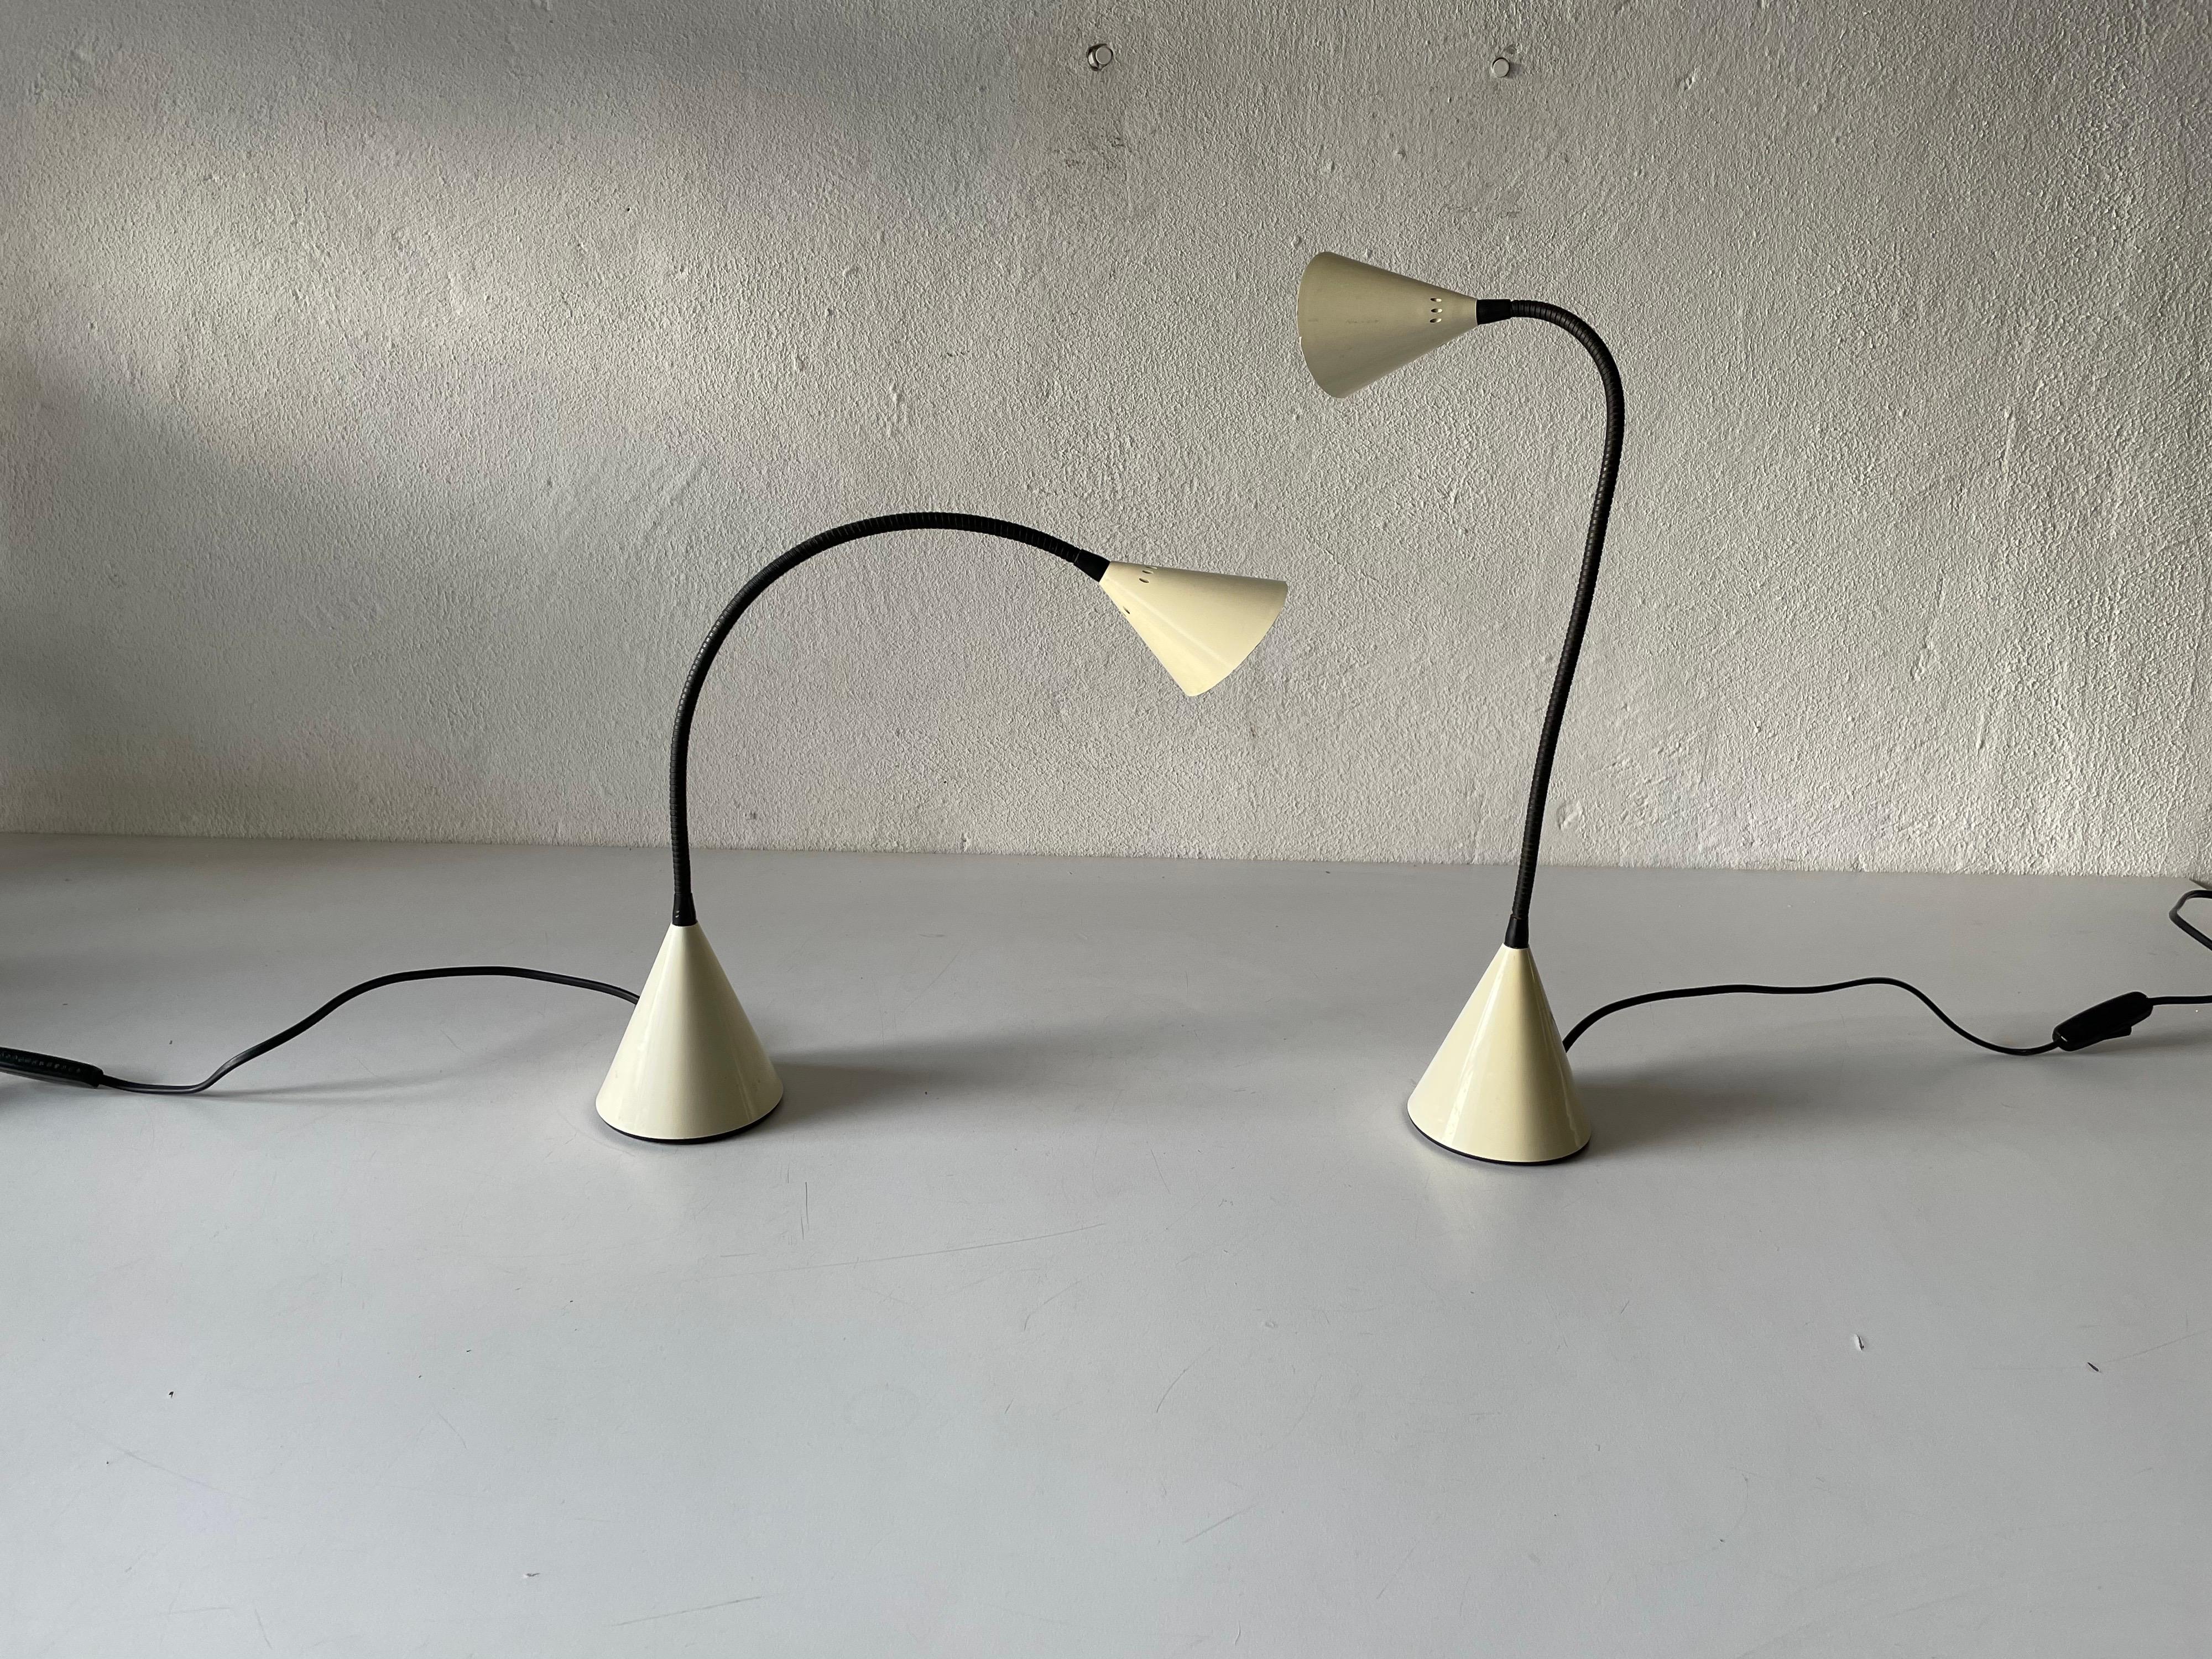 Pair of desk lamps by S. Renko for Egoluce, 1980s, Italy
Model Twist

Minimal design 
Very high quality.
Fully functional.
Adjustable body.

Original cable and plug. Switch on-off on the cable. 
This lamp is suitable for EU plug socket.